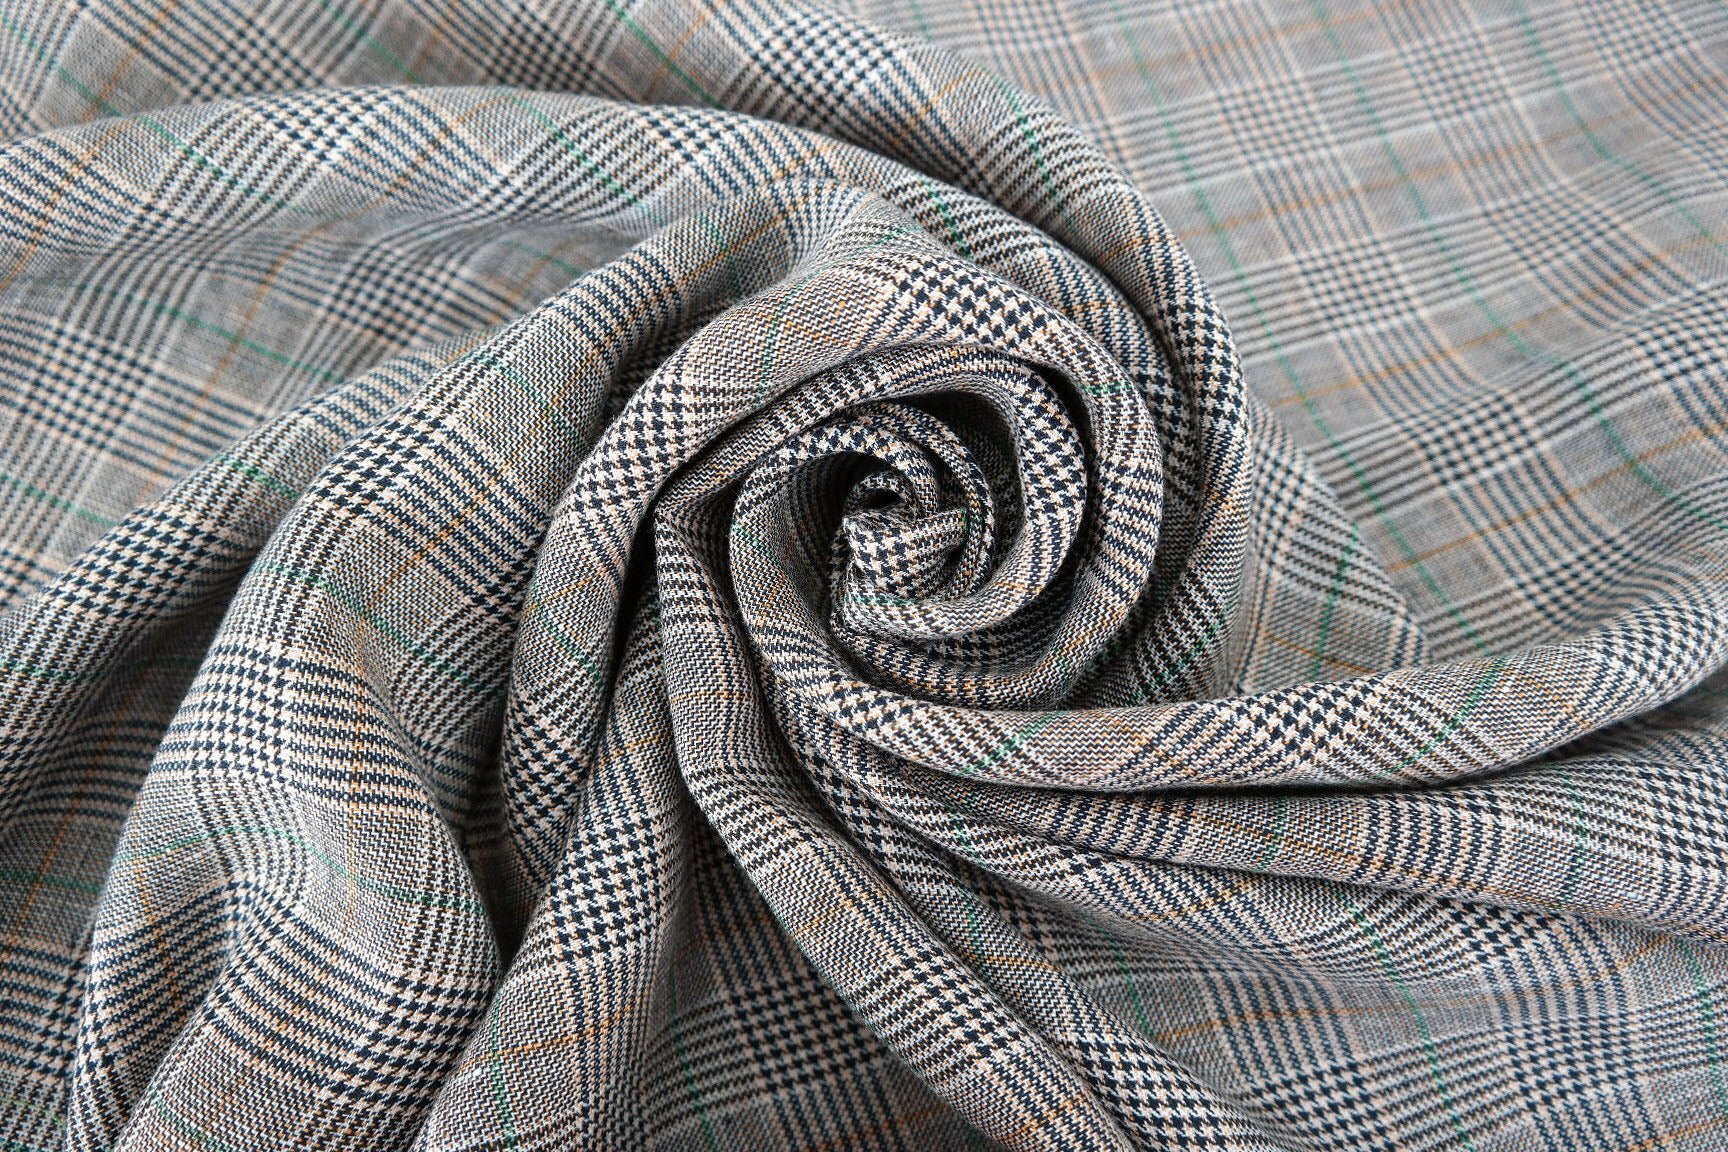 100% Linen Fabric Twill Multi Color Houndstooth Glen Plaid Medium Weight (6416) - The Linen Lab - Multi Colors